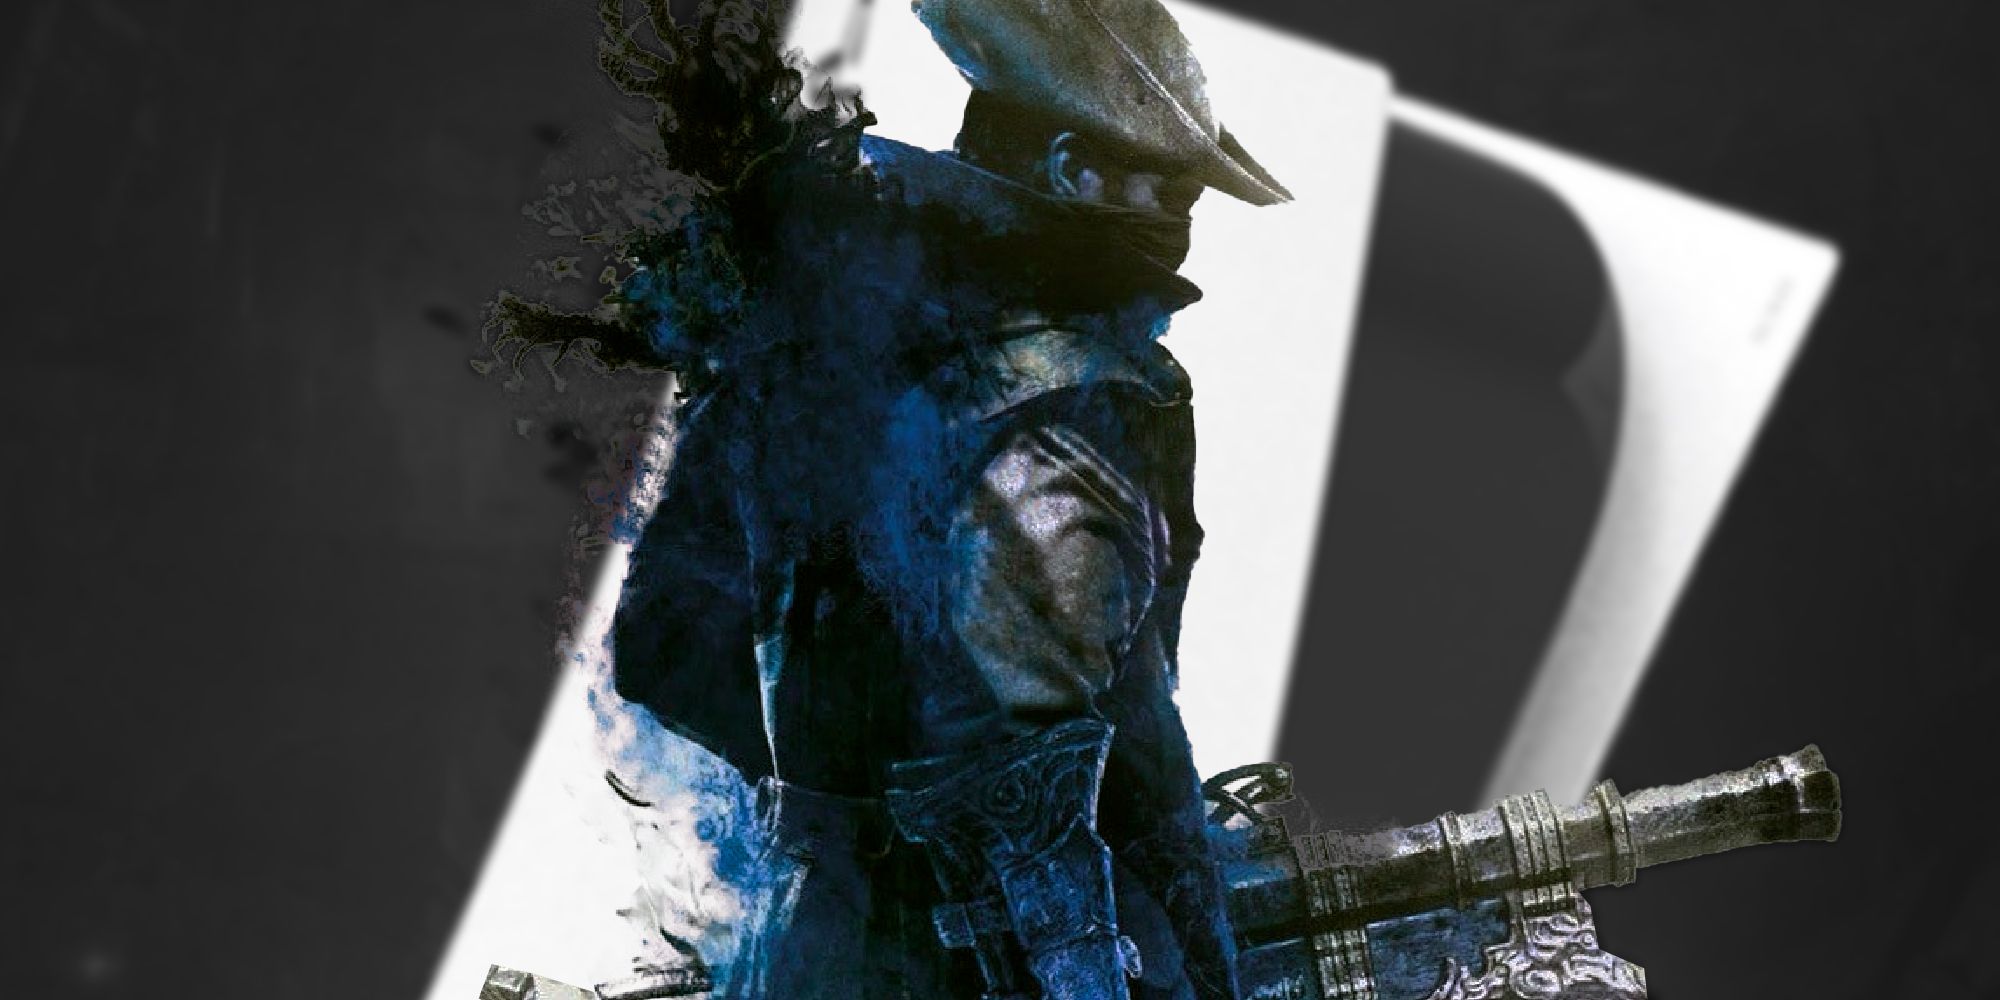 Would you rather have a Bloodborne remake or sequel? Why? : r/fromsoftware